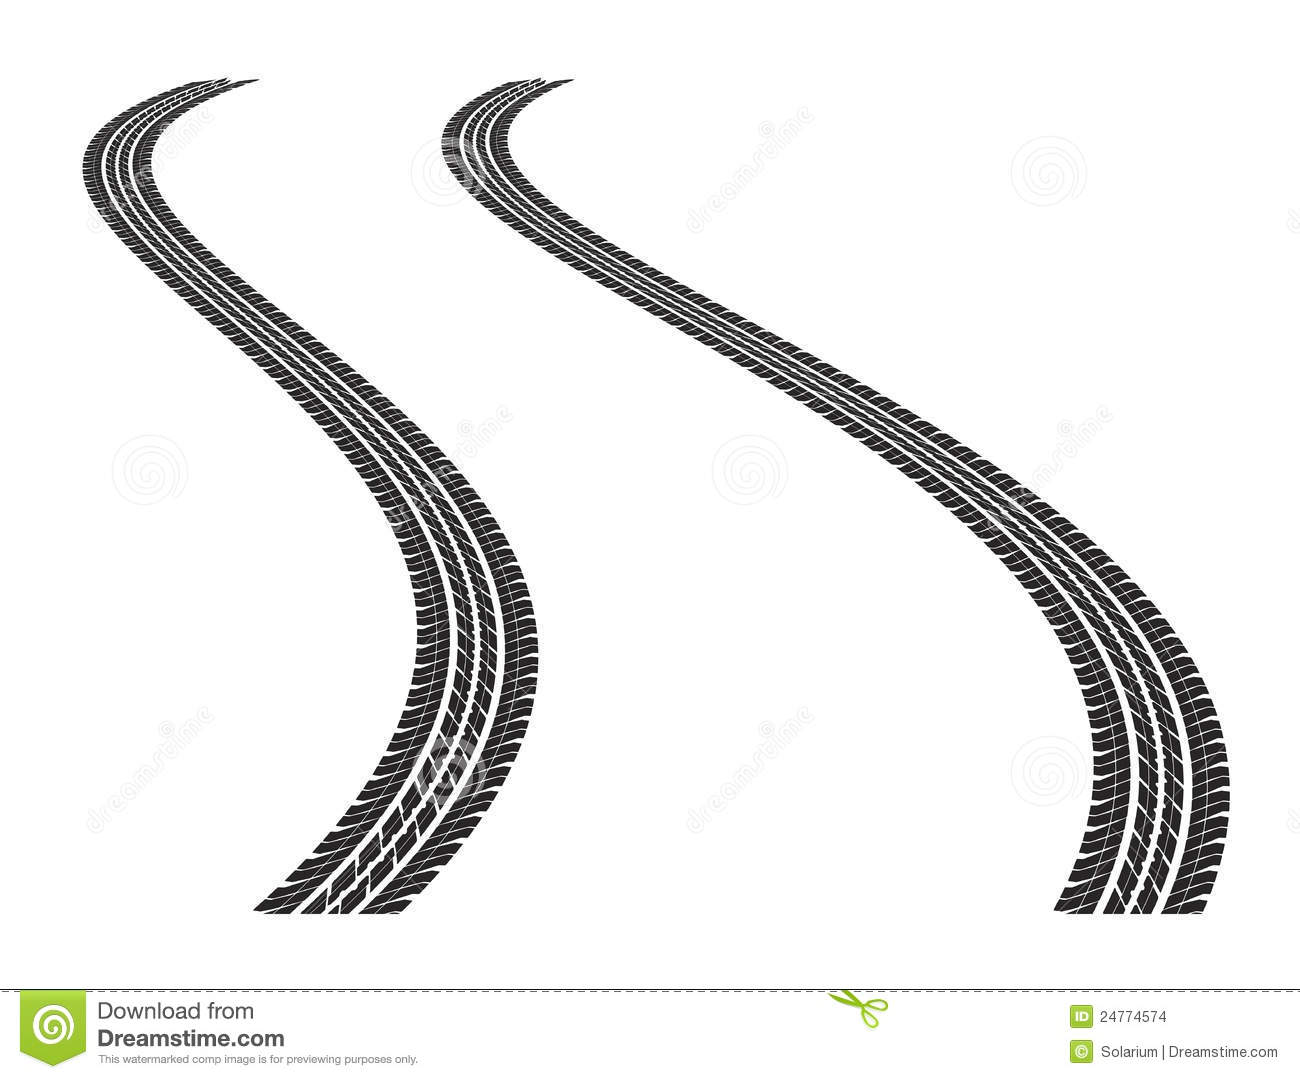 Tire Tracks Stock Images   Image  24774574